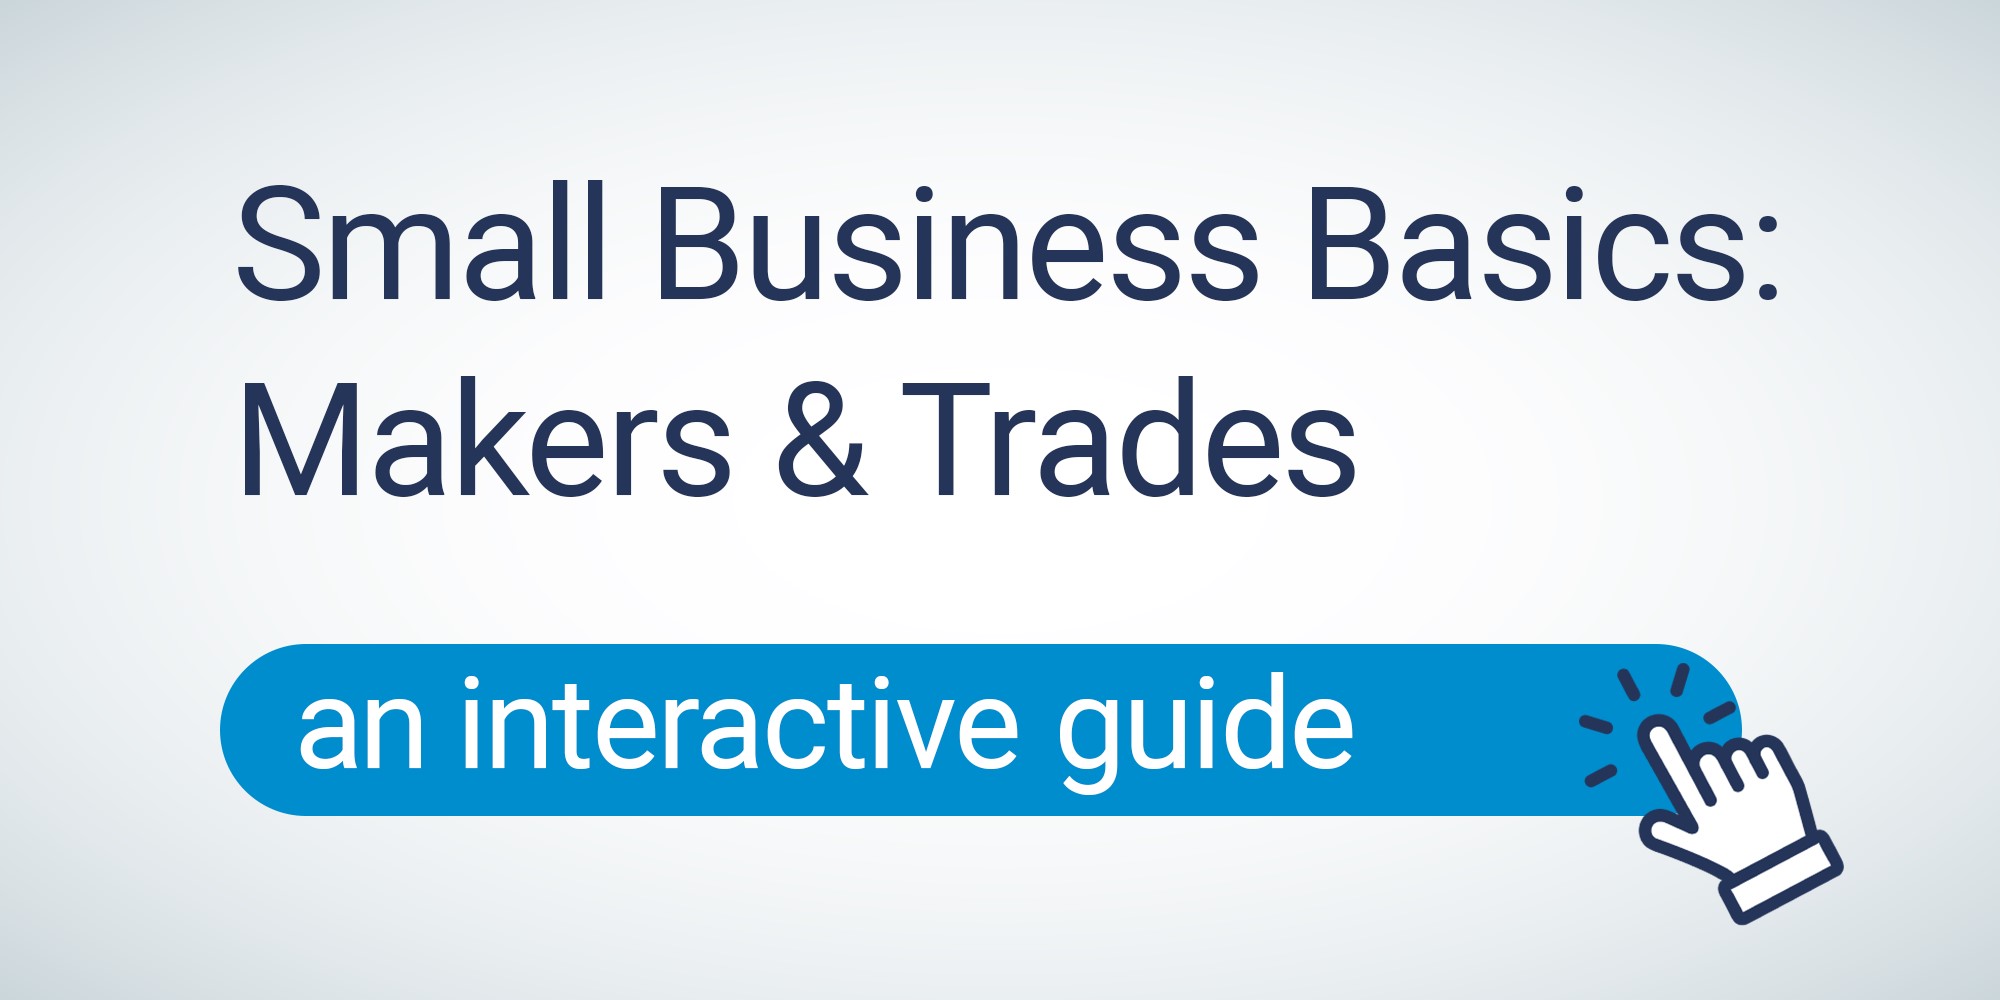 Small Business Basics: Makers & Trades